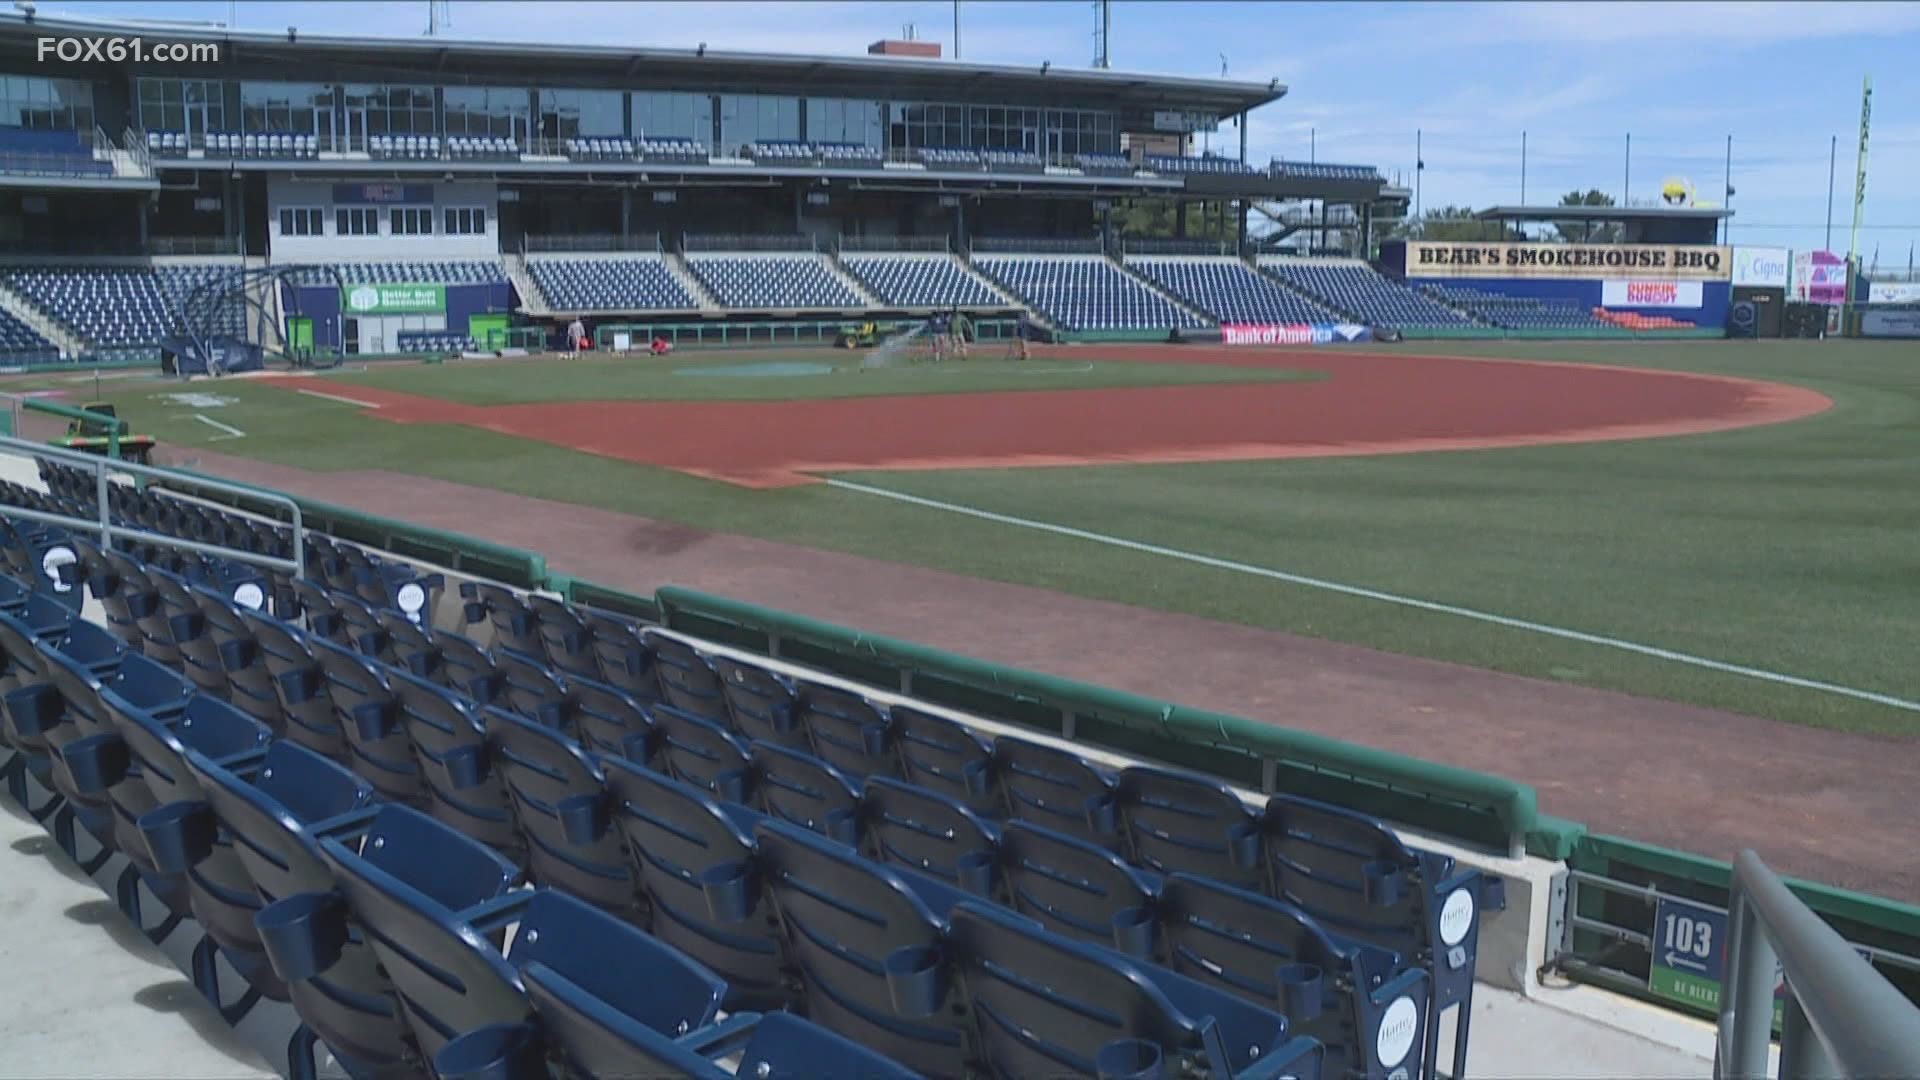 College baseball games to return to Dunkin' Donuts Park